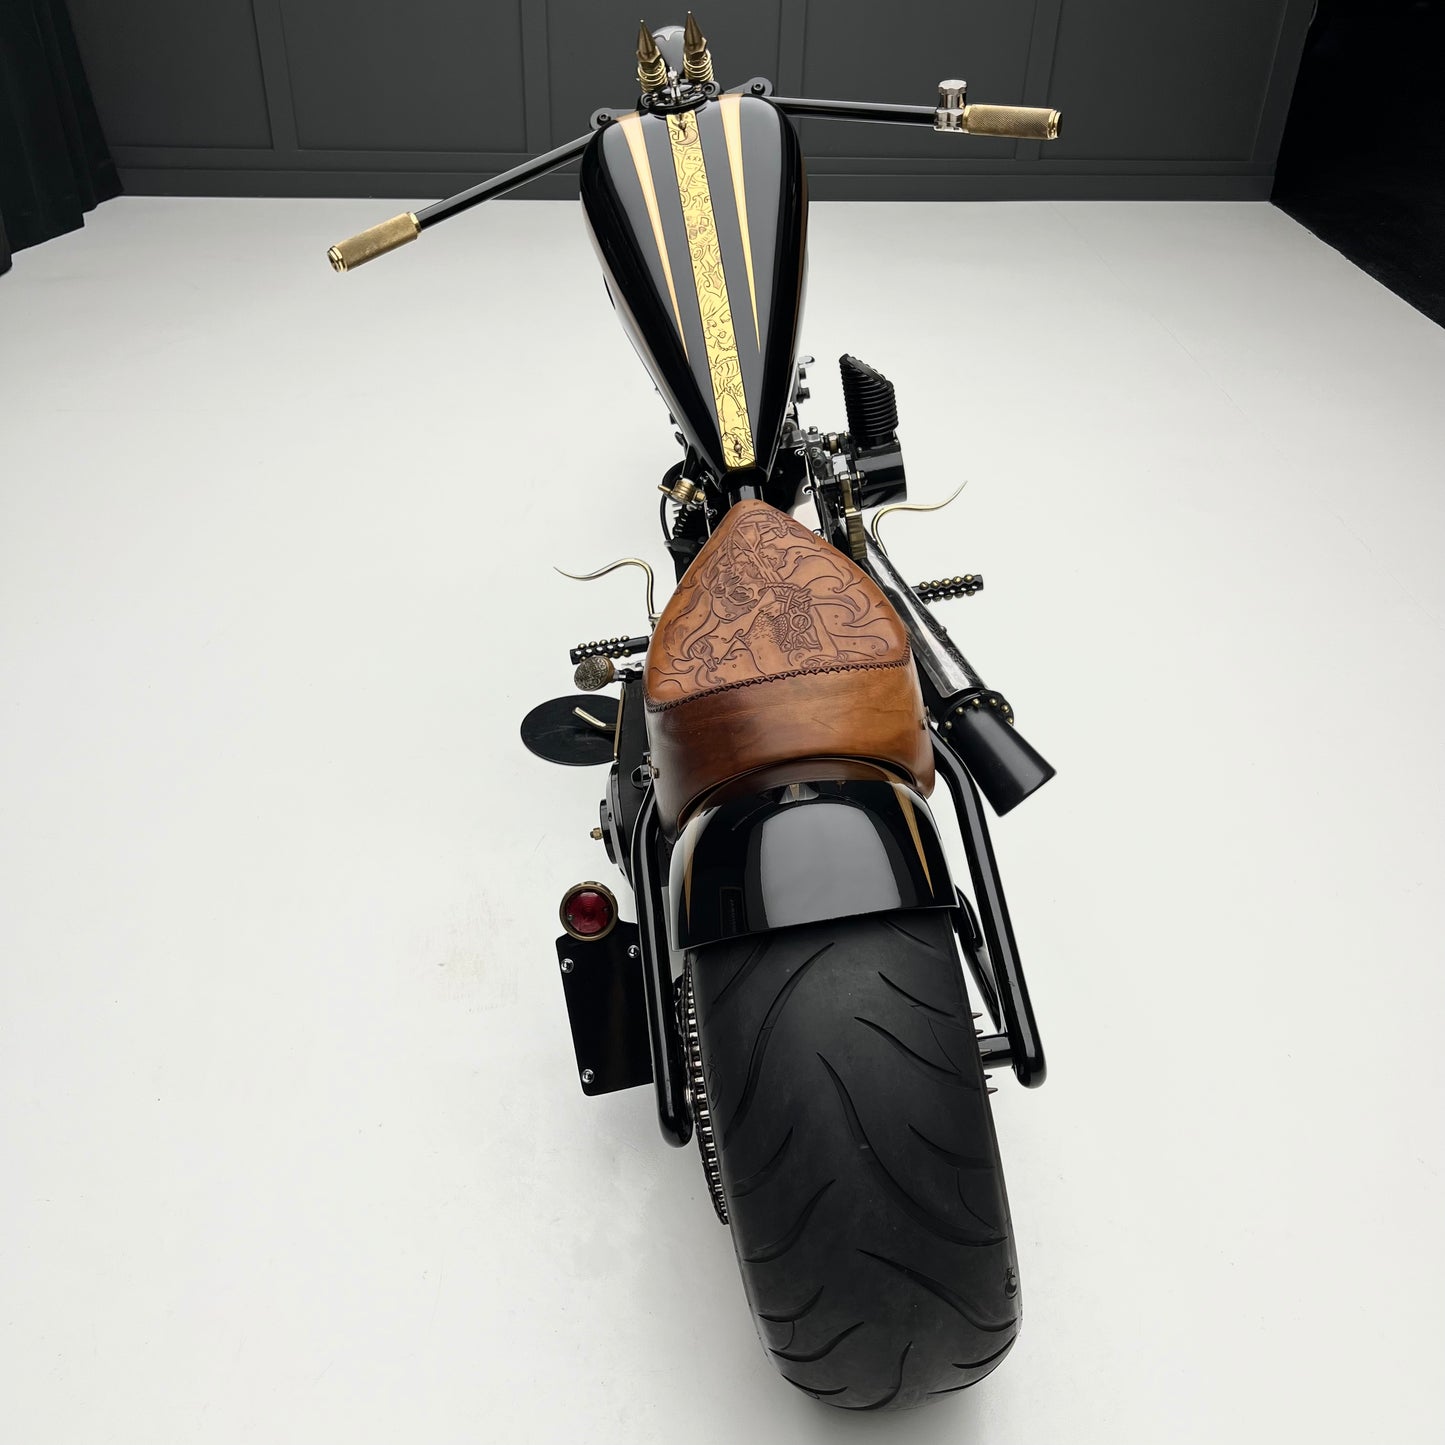 Load image into Gallery viewer, 2011 Custom Chopper